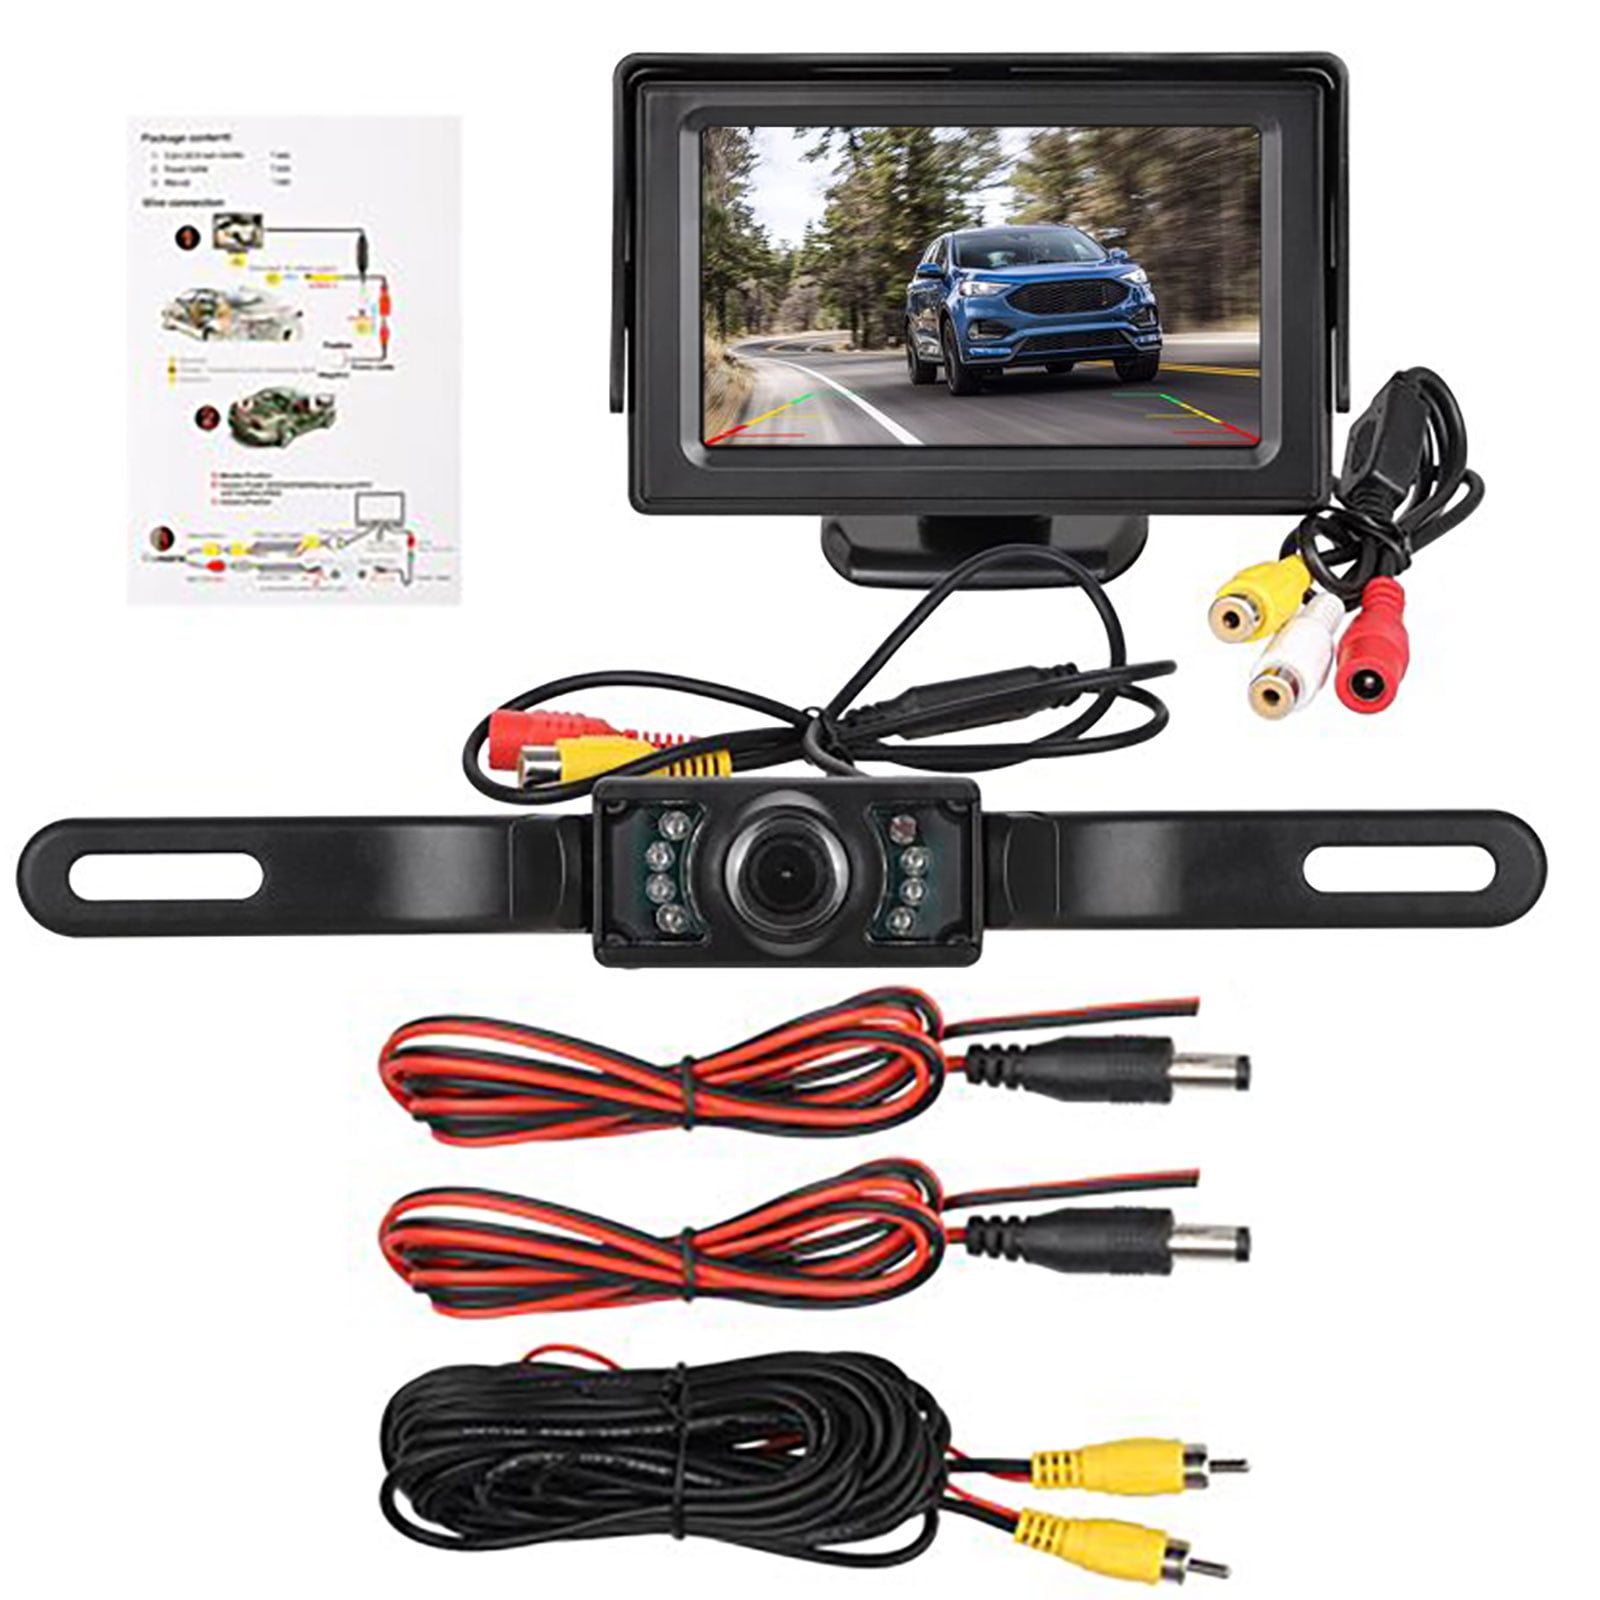 Universal Car Rear View/Reversing/Reverse Camera With 12V Audio Video AV Extension Cable Brass anti-interference for Car RV Caravan Travel Trailer Hitch Tow Truck 